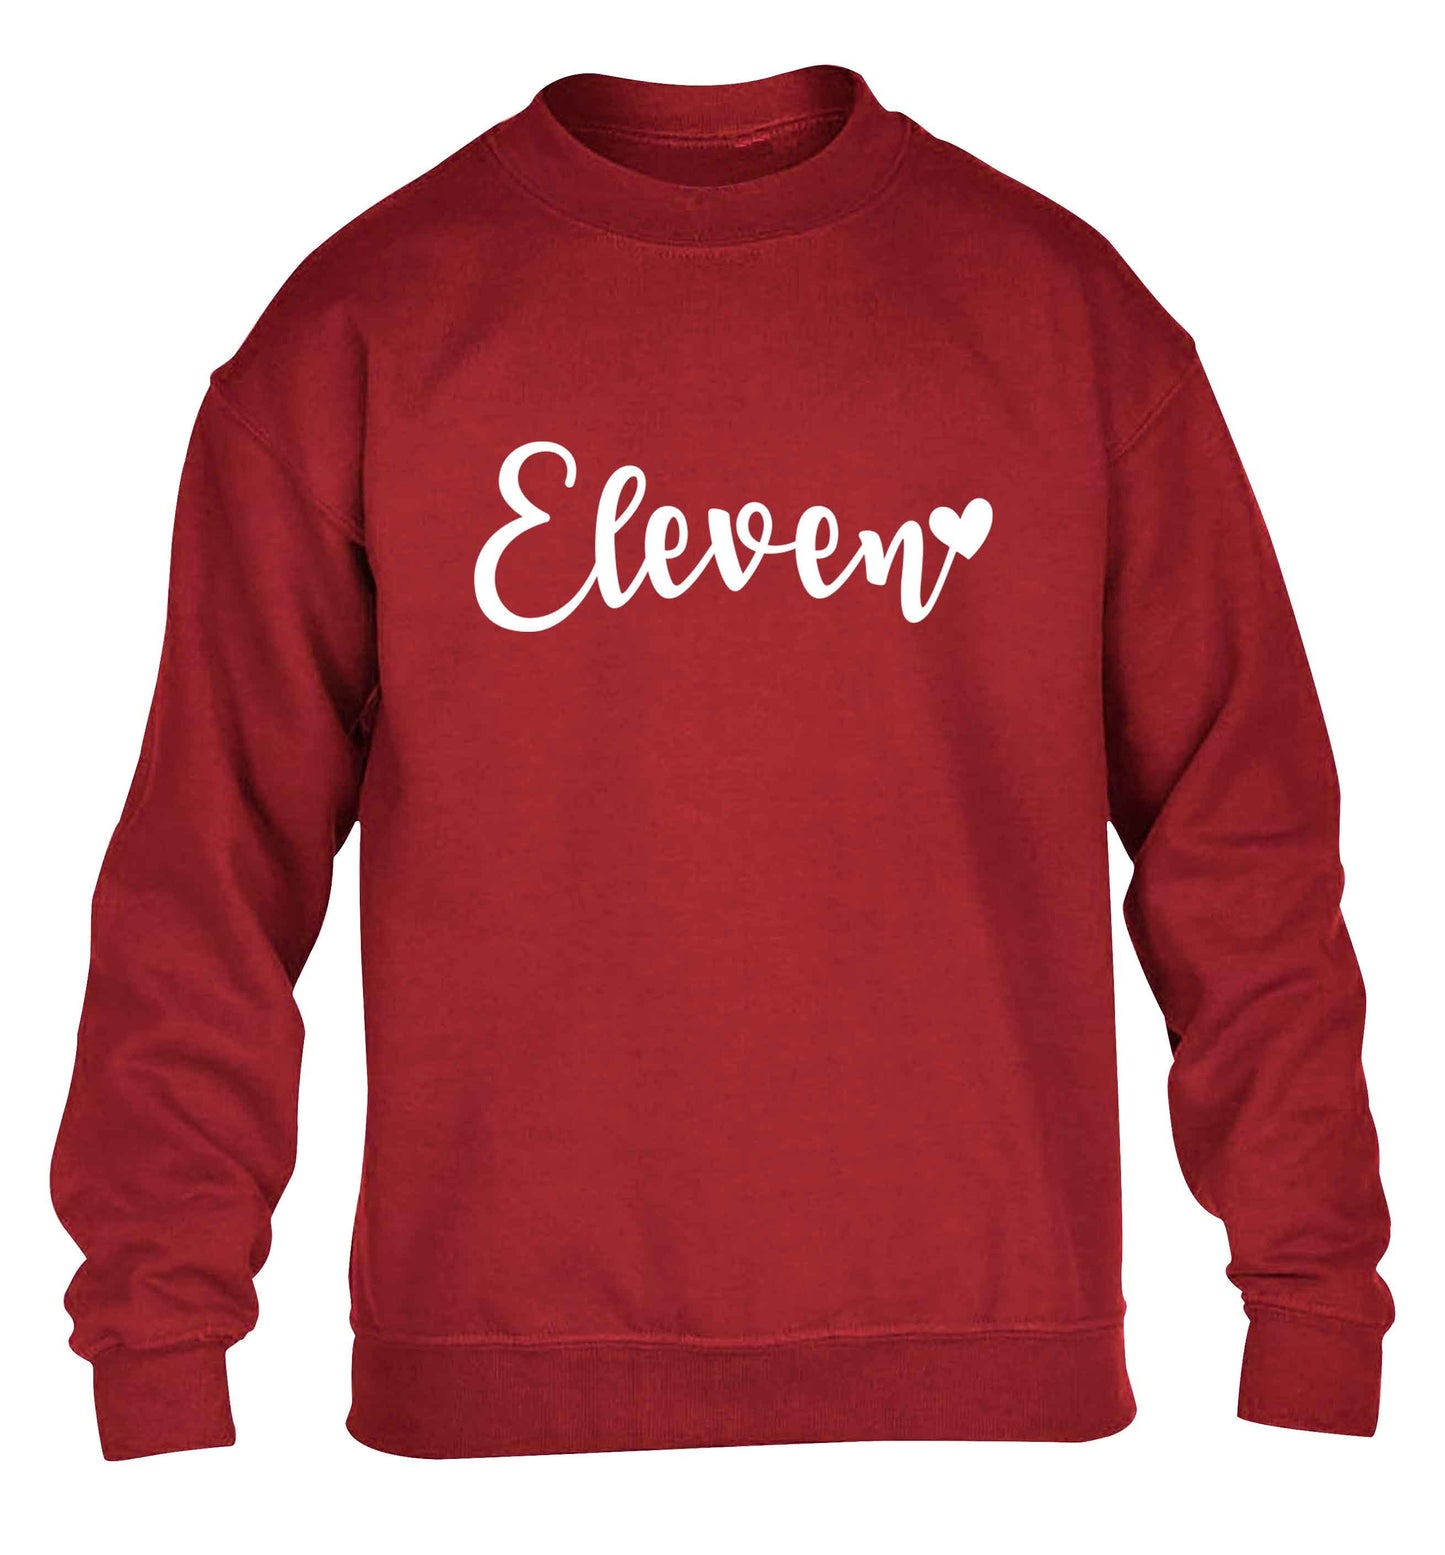 Eleven and heart! children's grey sweater 12-13 Years